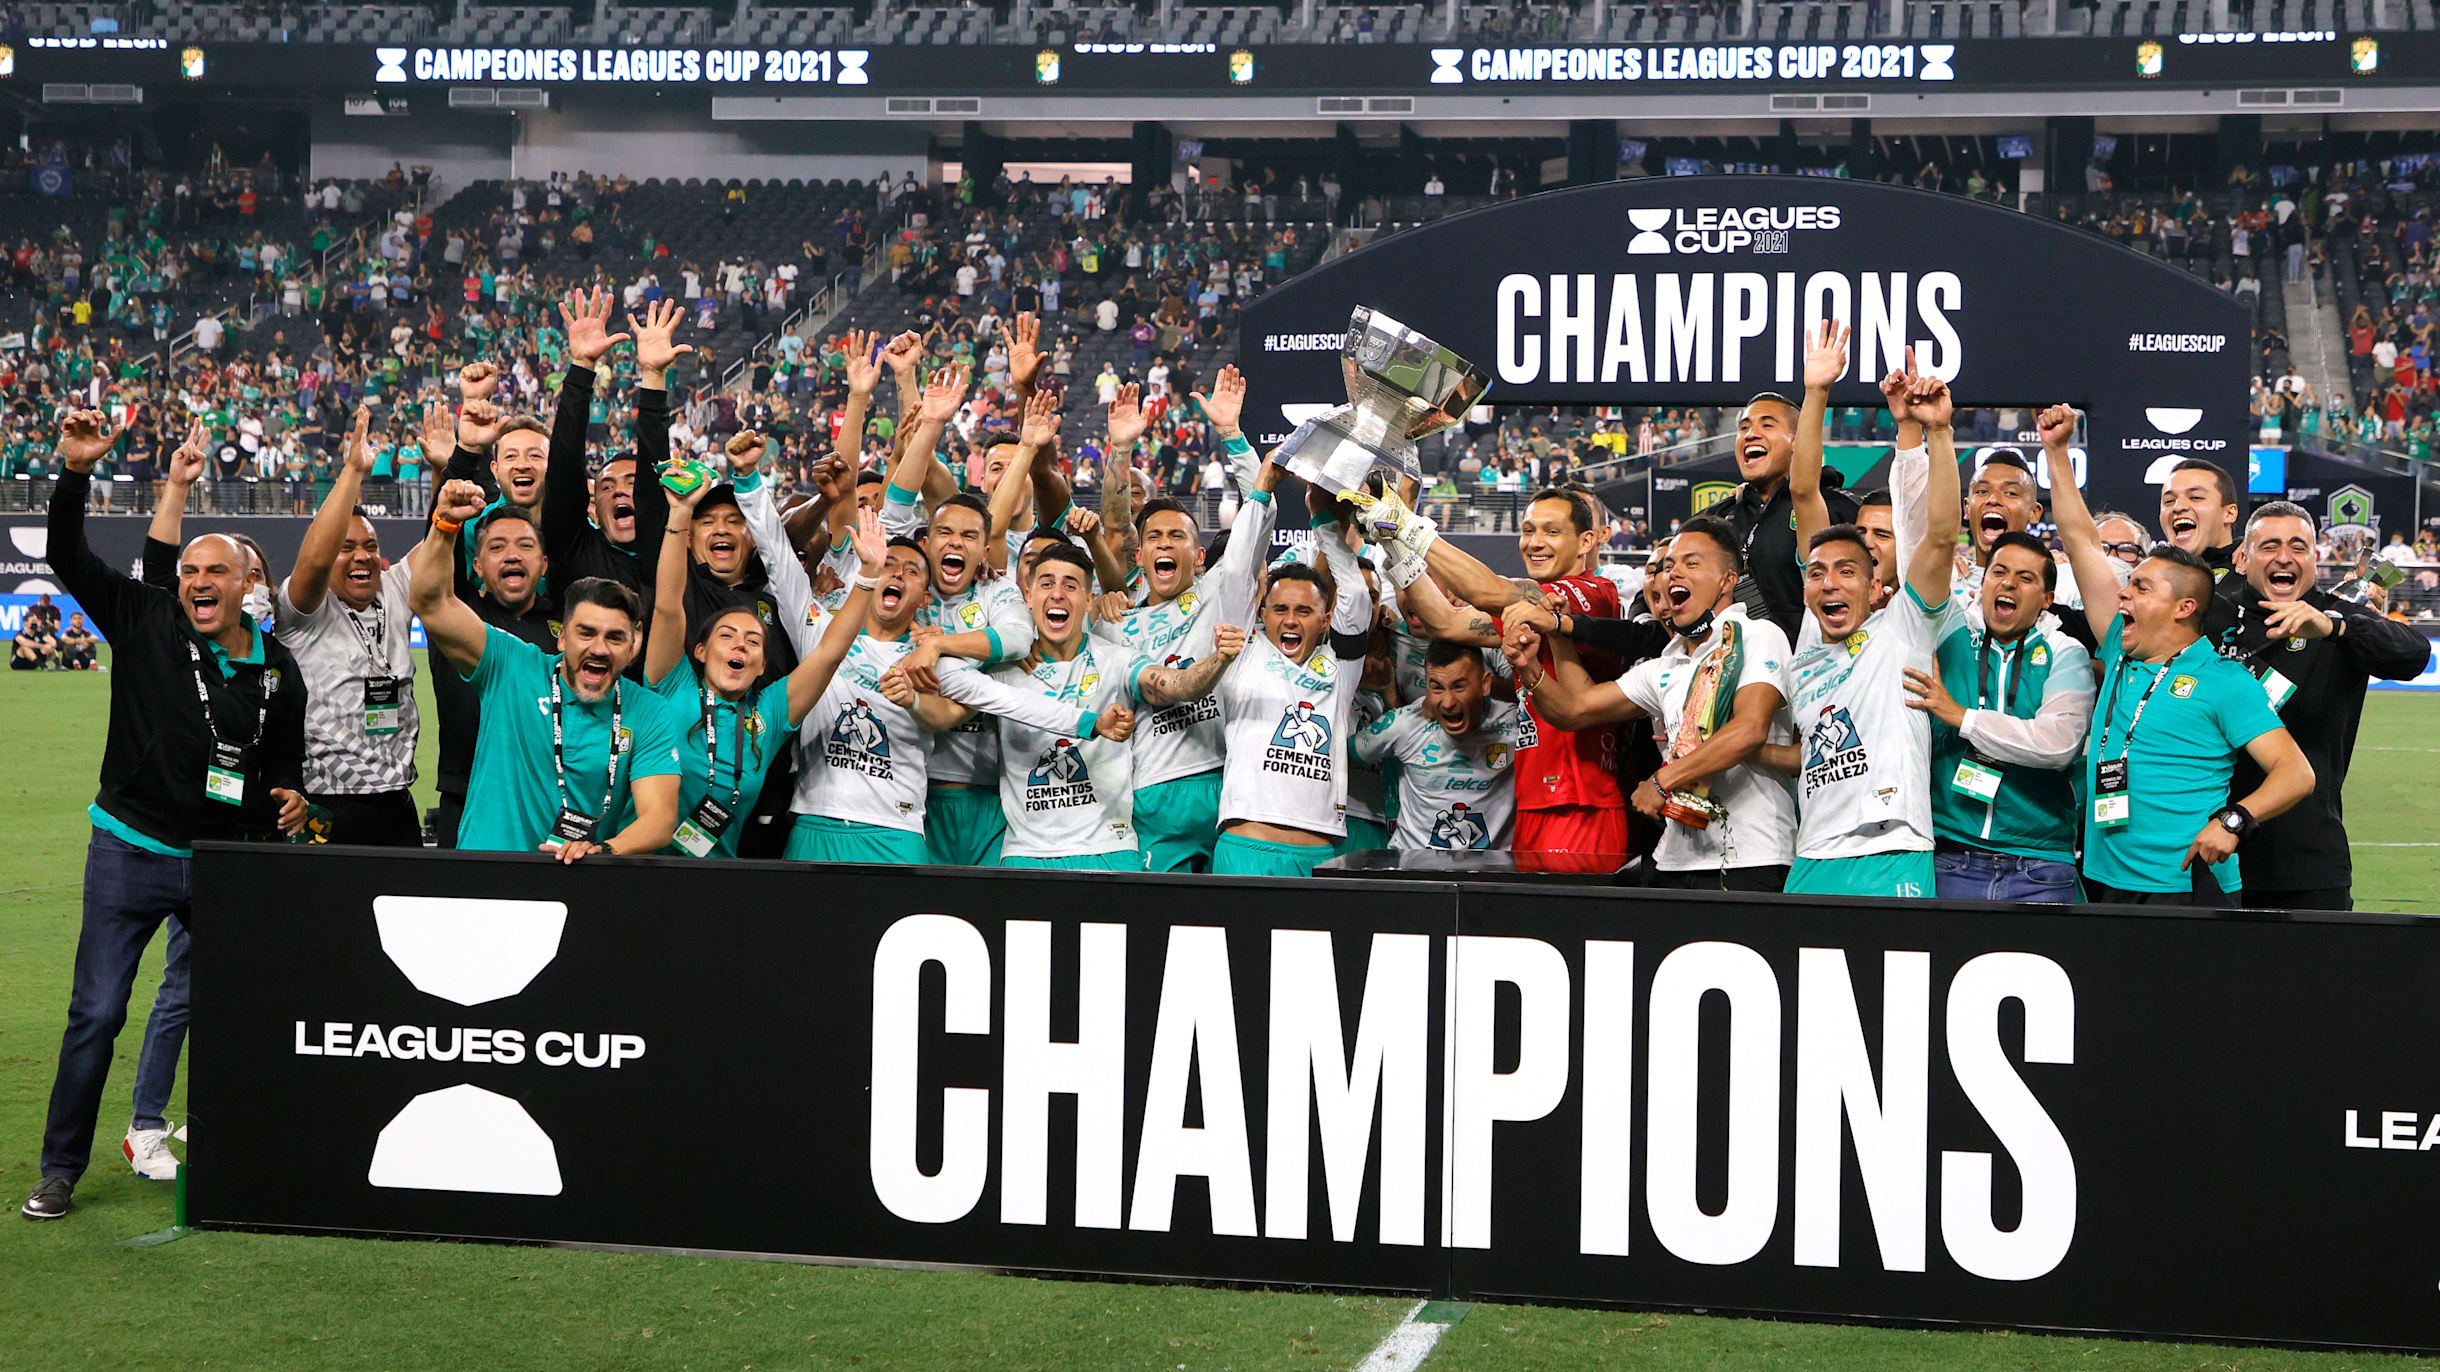 Leagues Cup: While an MLS team was crowned champion, what are the